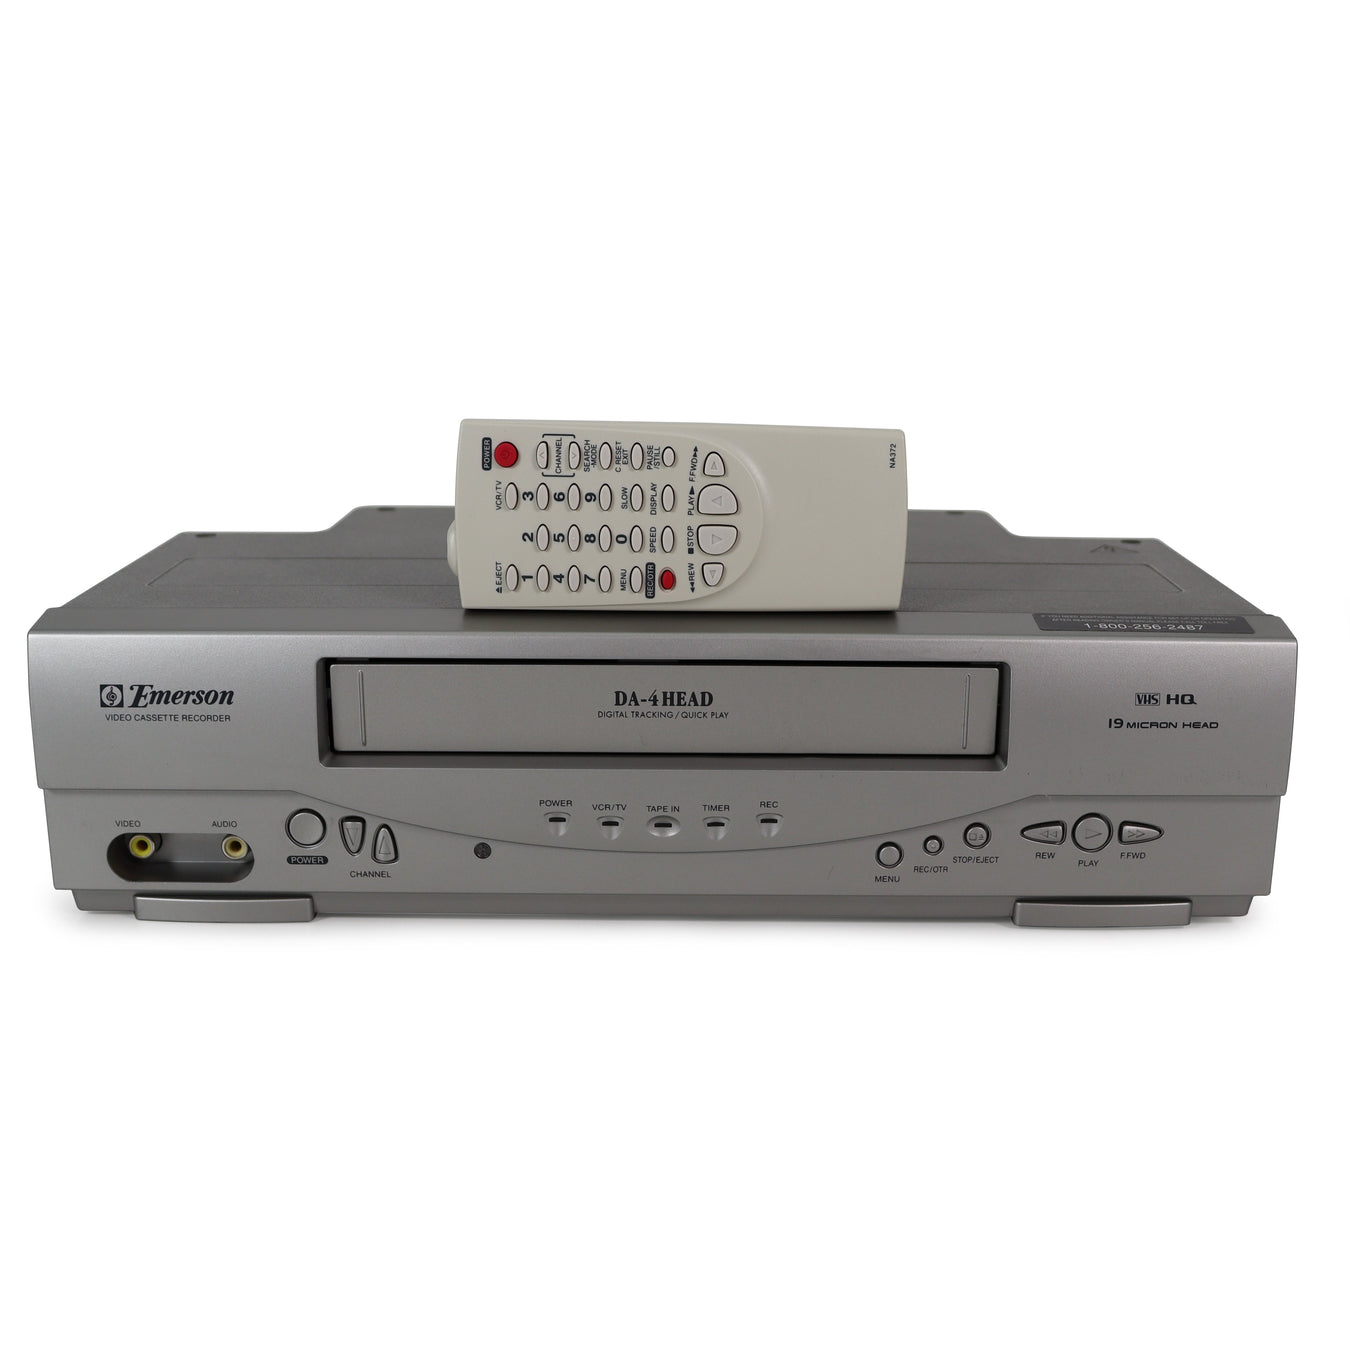 stand-alone vhs player vcr video cassette tape recorder recording system hifi hi-fi mono remote new refurbised spencertified hdmi stand-alone sony emerson toshiba jvc sanyo panasonic funai and more brands